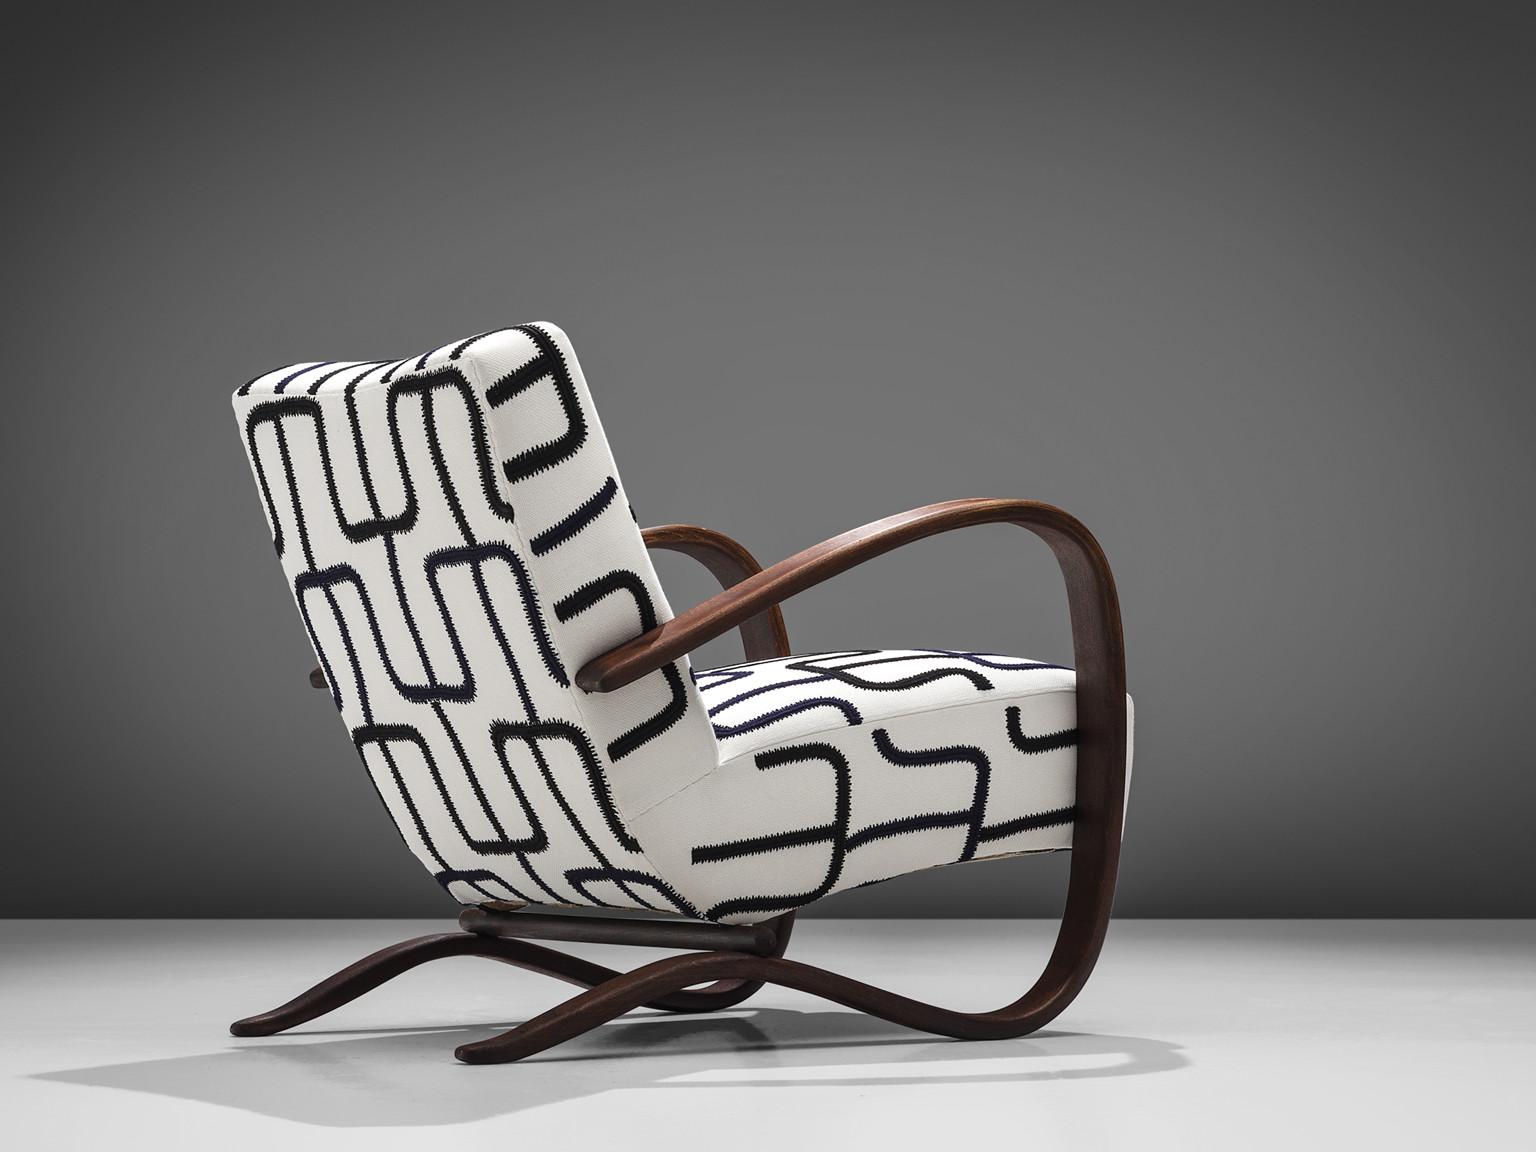 Jindrich Halabala, customizable lounge chair, wood, fabric, Czech Republic, 1930s 

Extraordinary easy chair with graphic upholstery. This chair has a very dynamic and abundant appearance. Beautifully curved armrests in a dark brown color add a